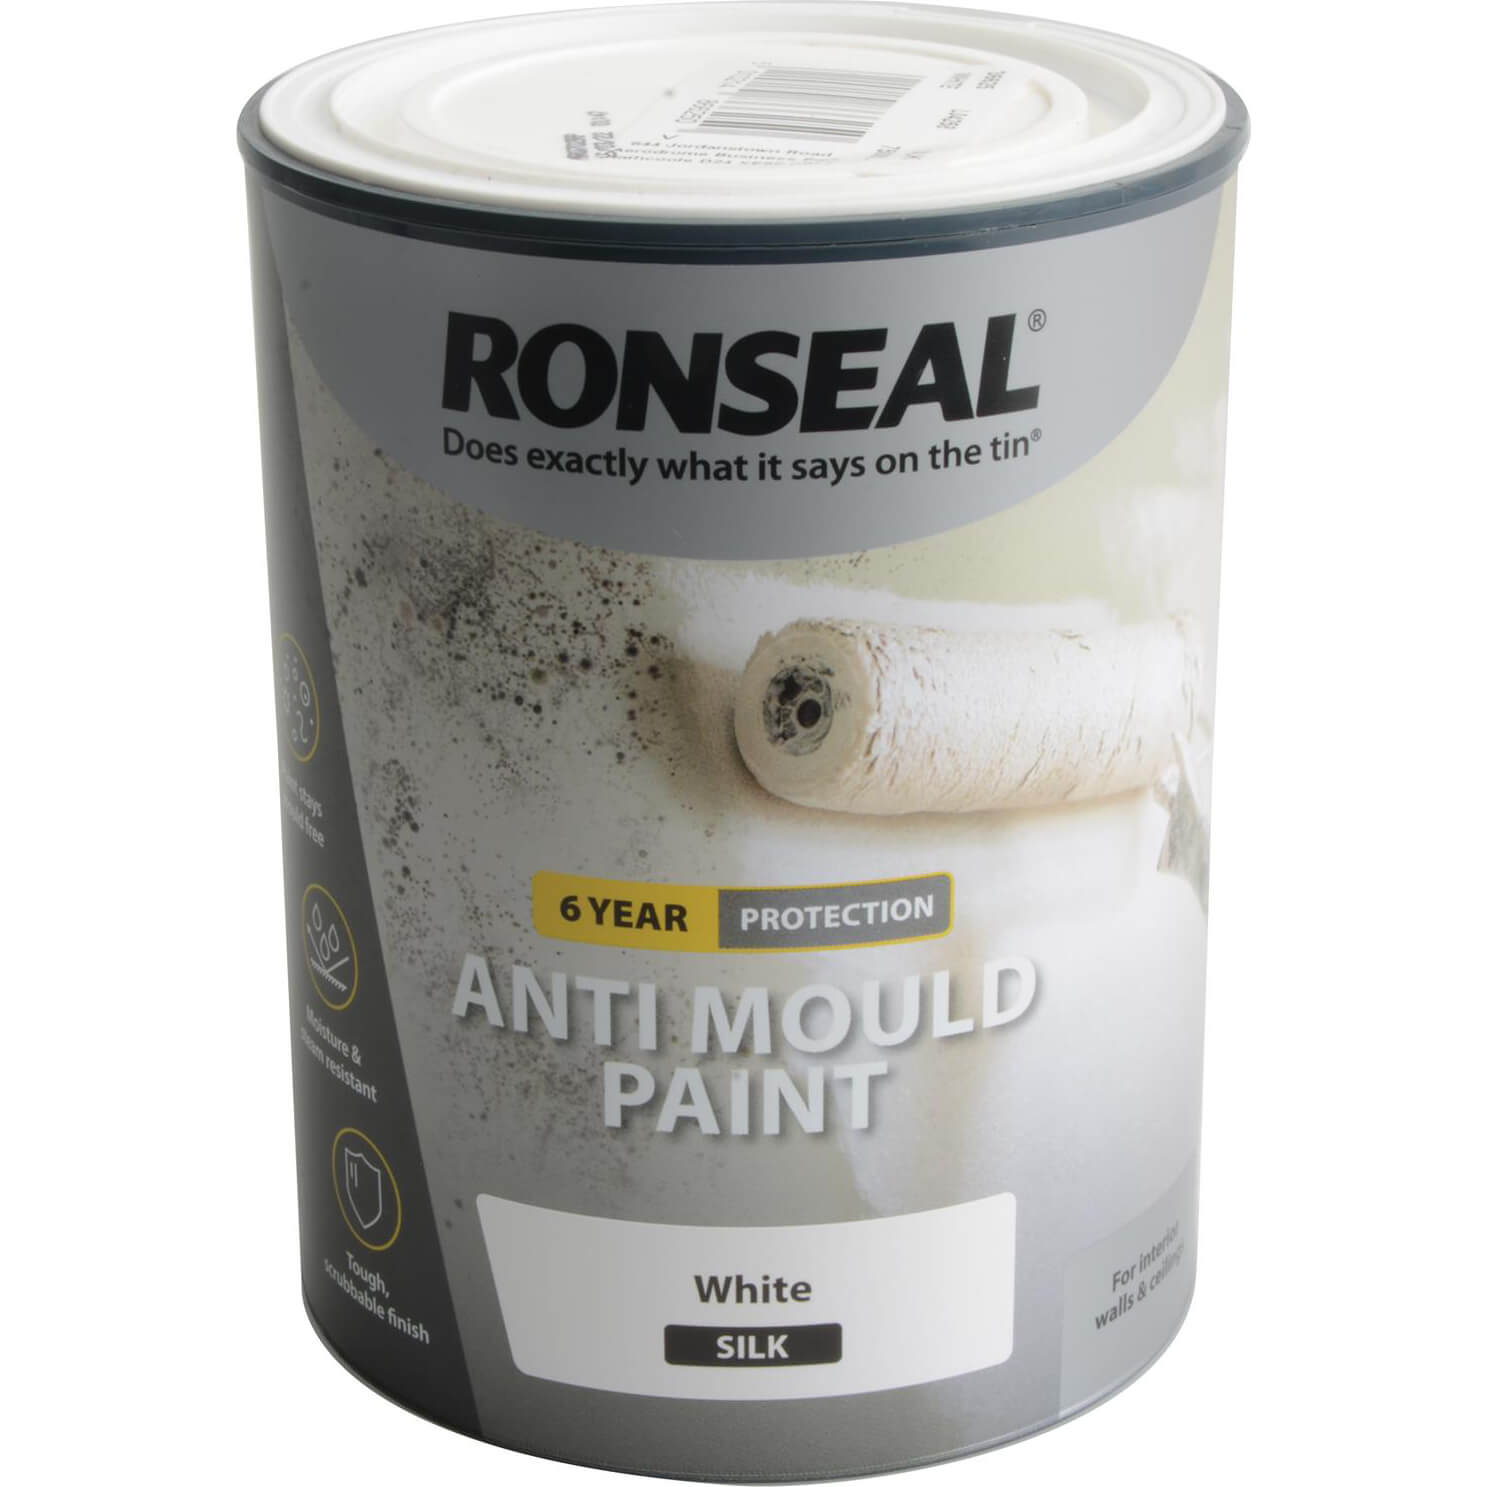 Image of Ronseal Anti Mould Paint White Silk 750ml